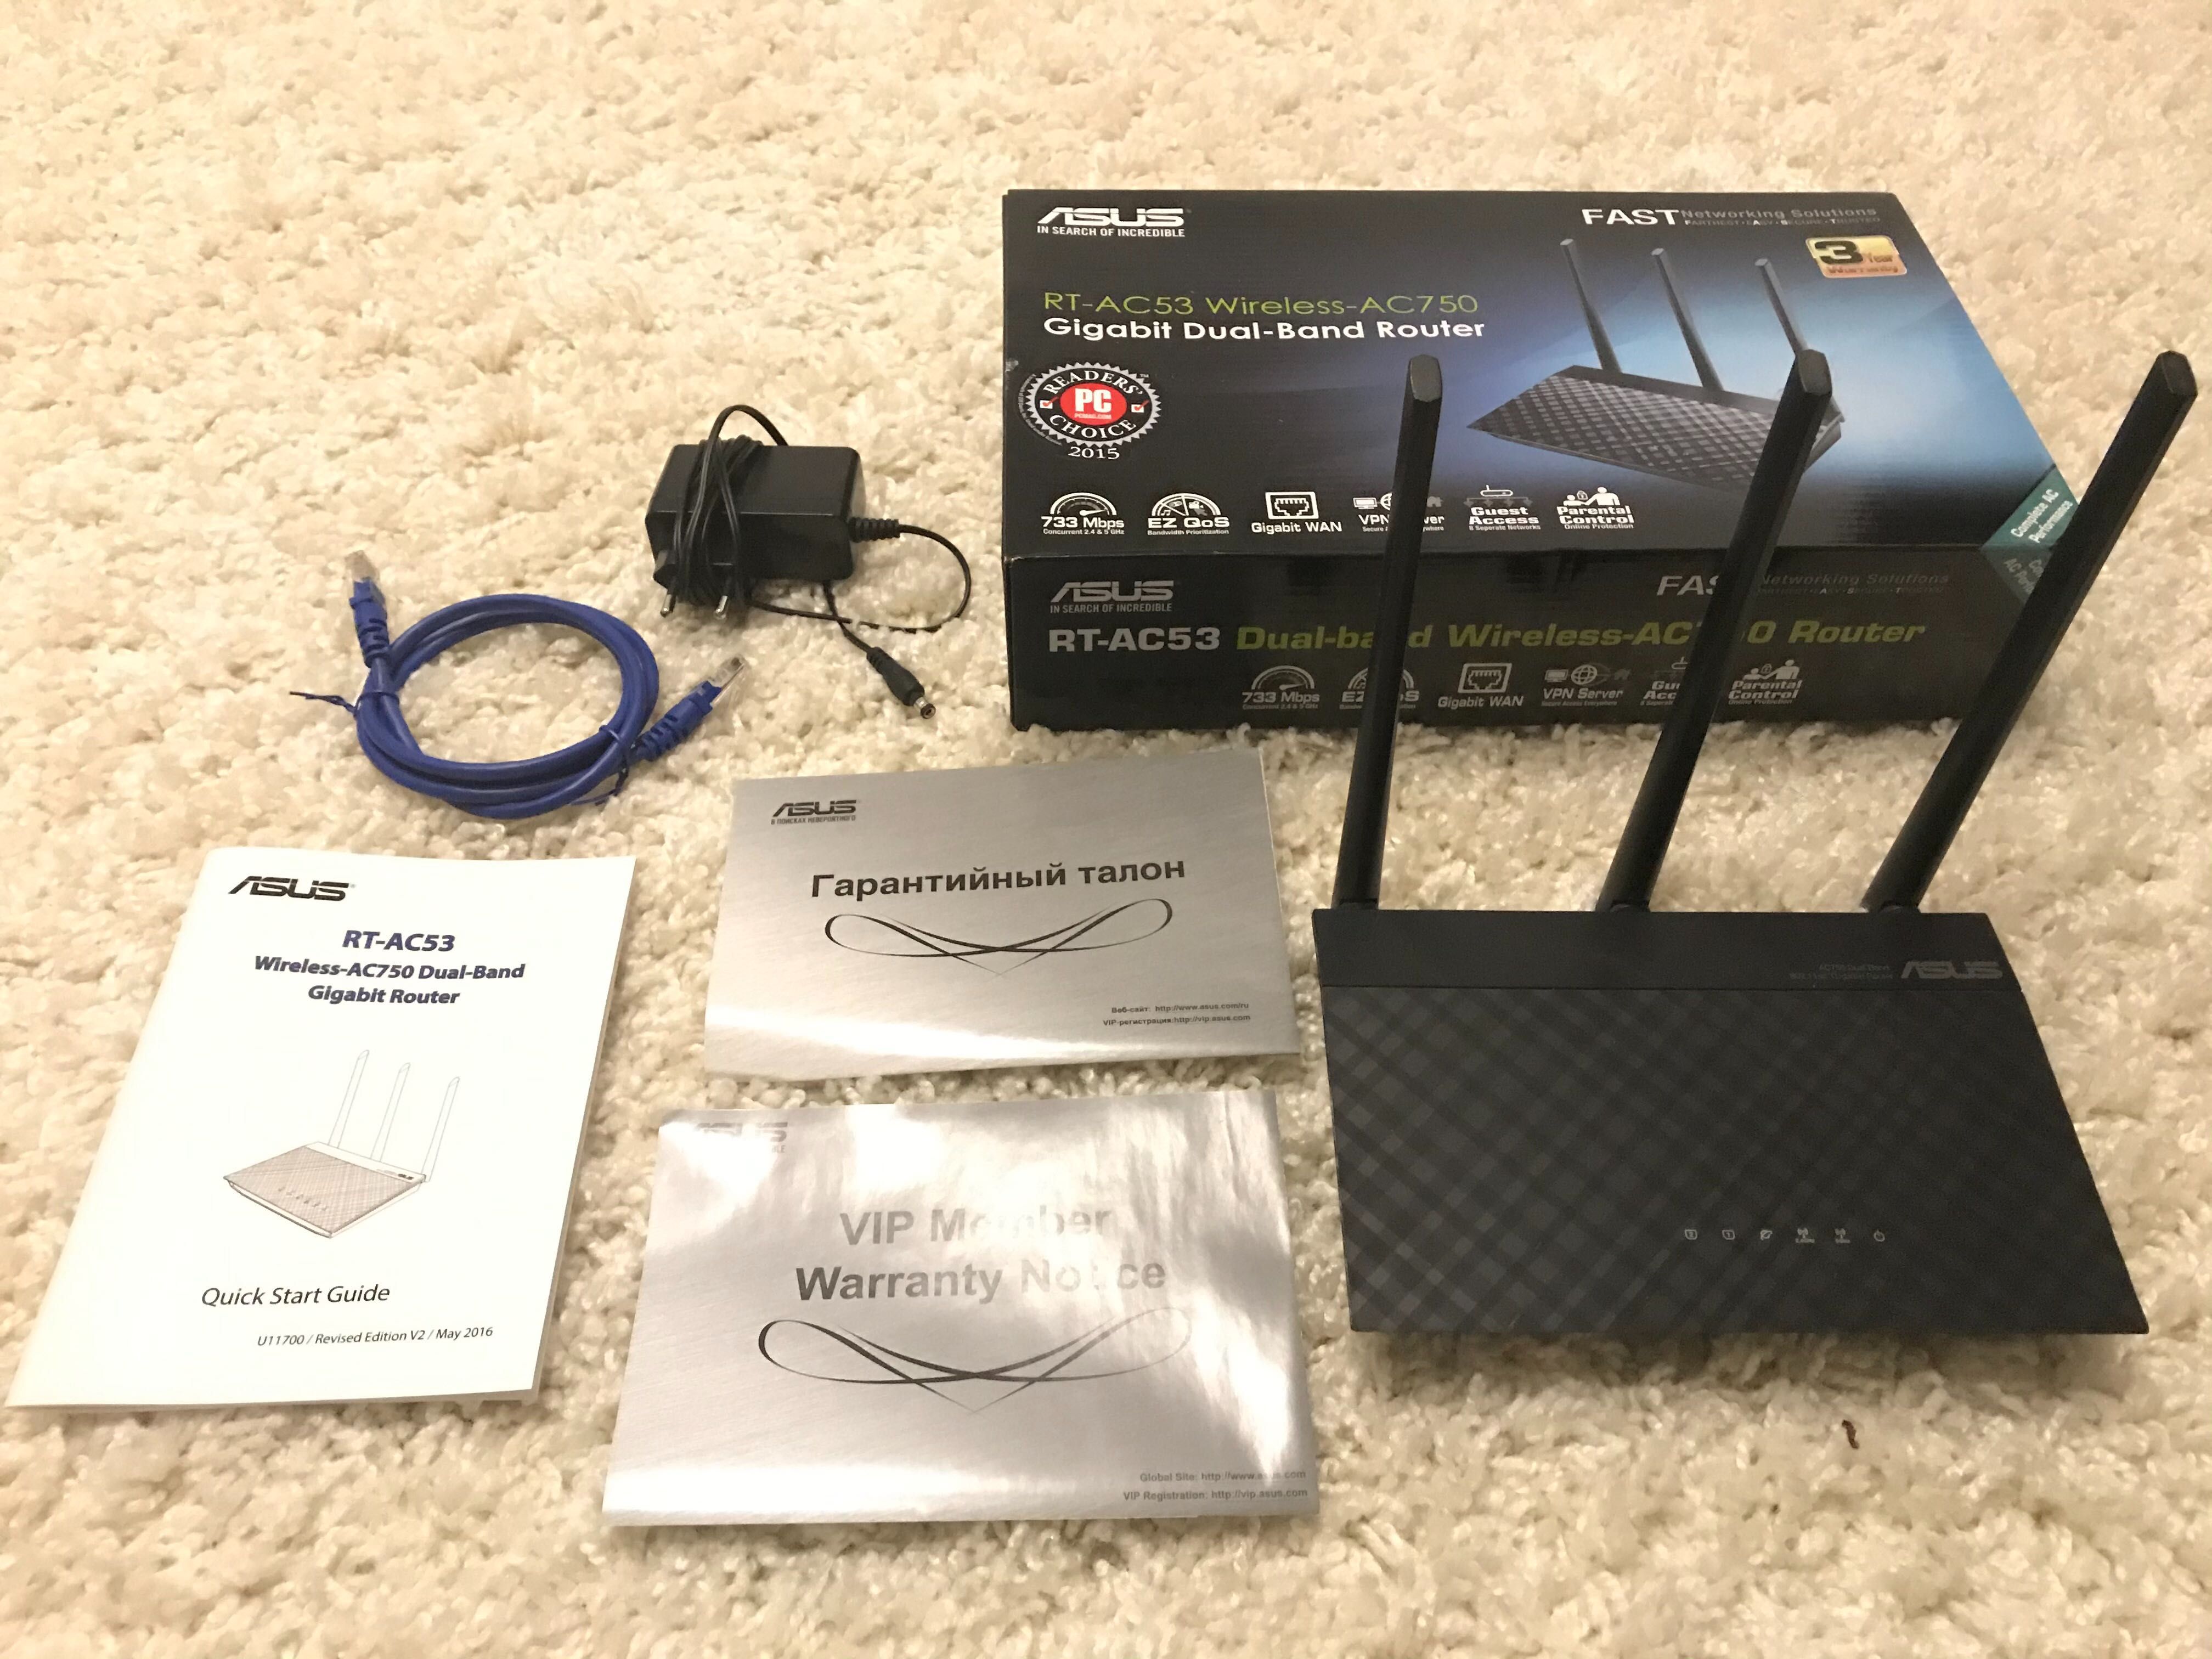 Router ASUS RT-AC53 AC750 Dual Band - Wireless